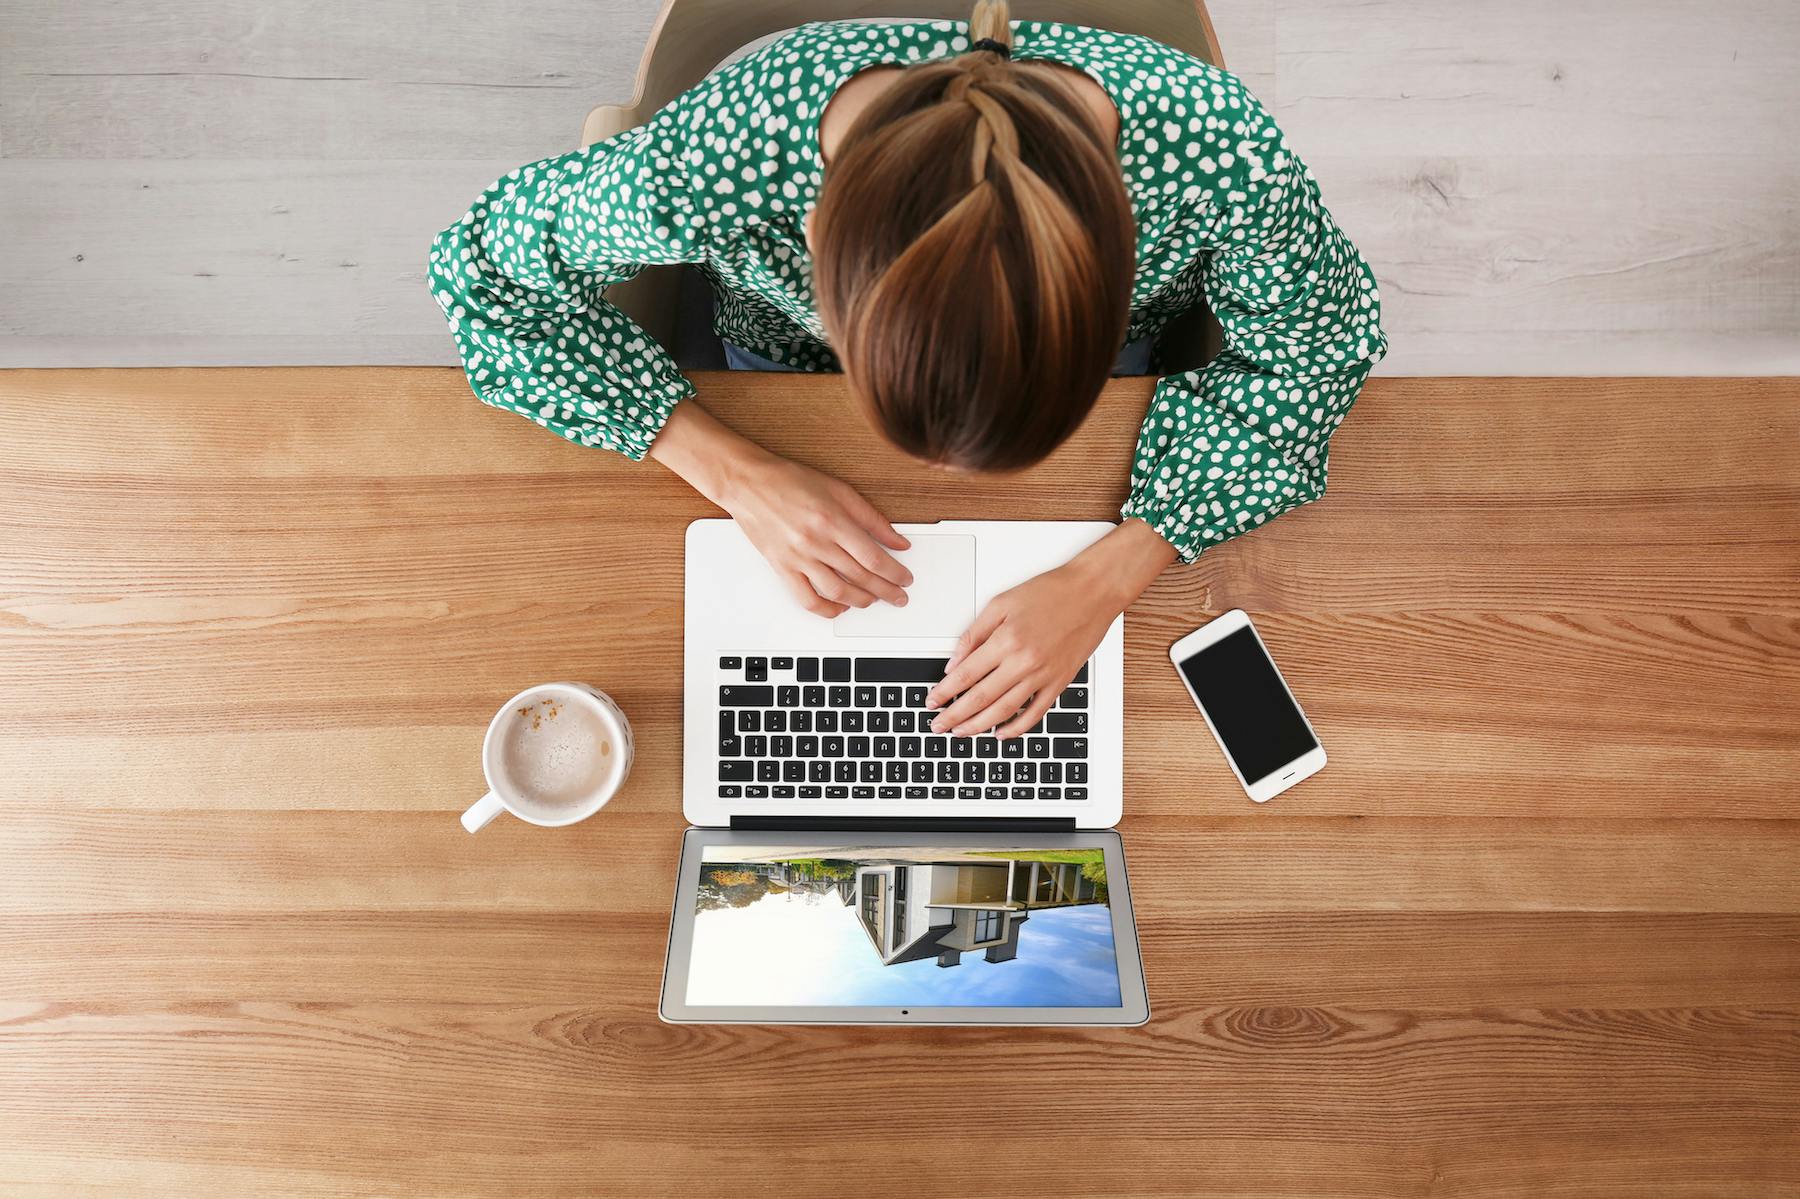 Birds-eye-view of a woman reviewing homes and property management information on her laptop with a phone and cup of tea